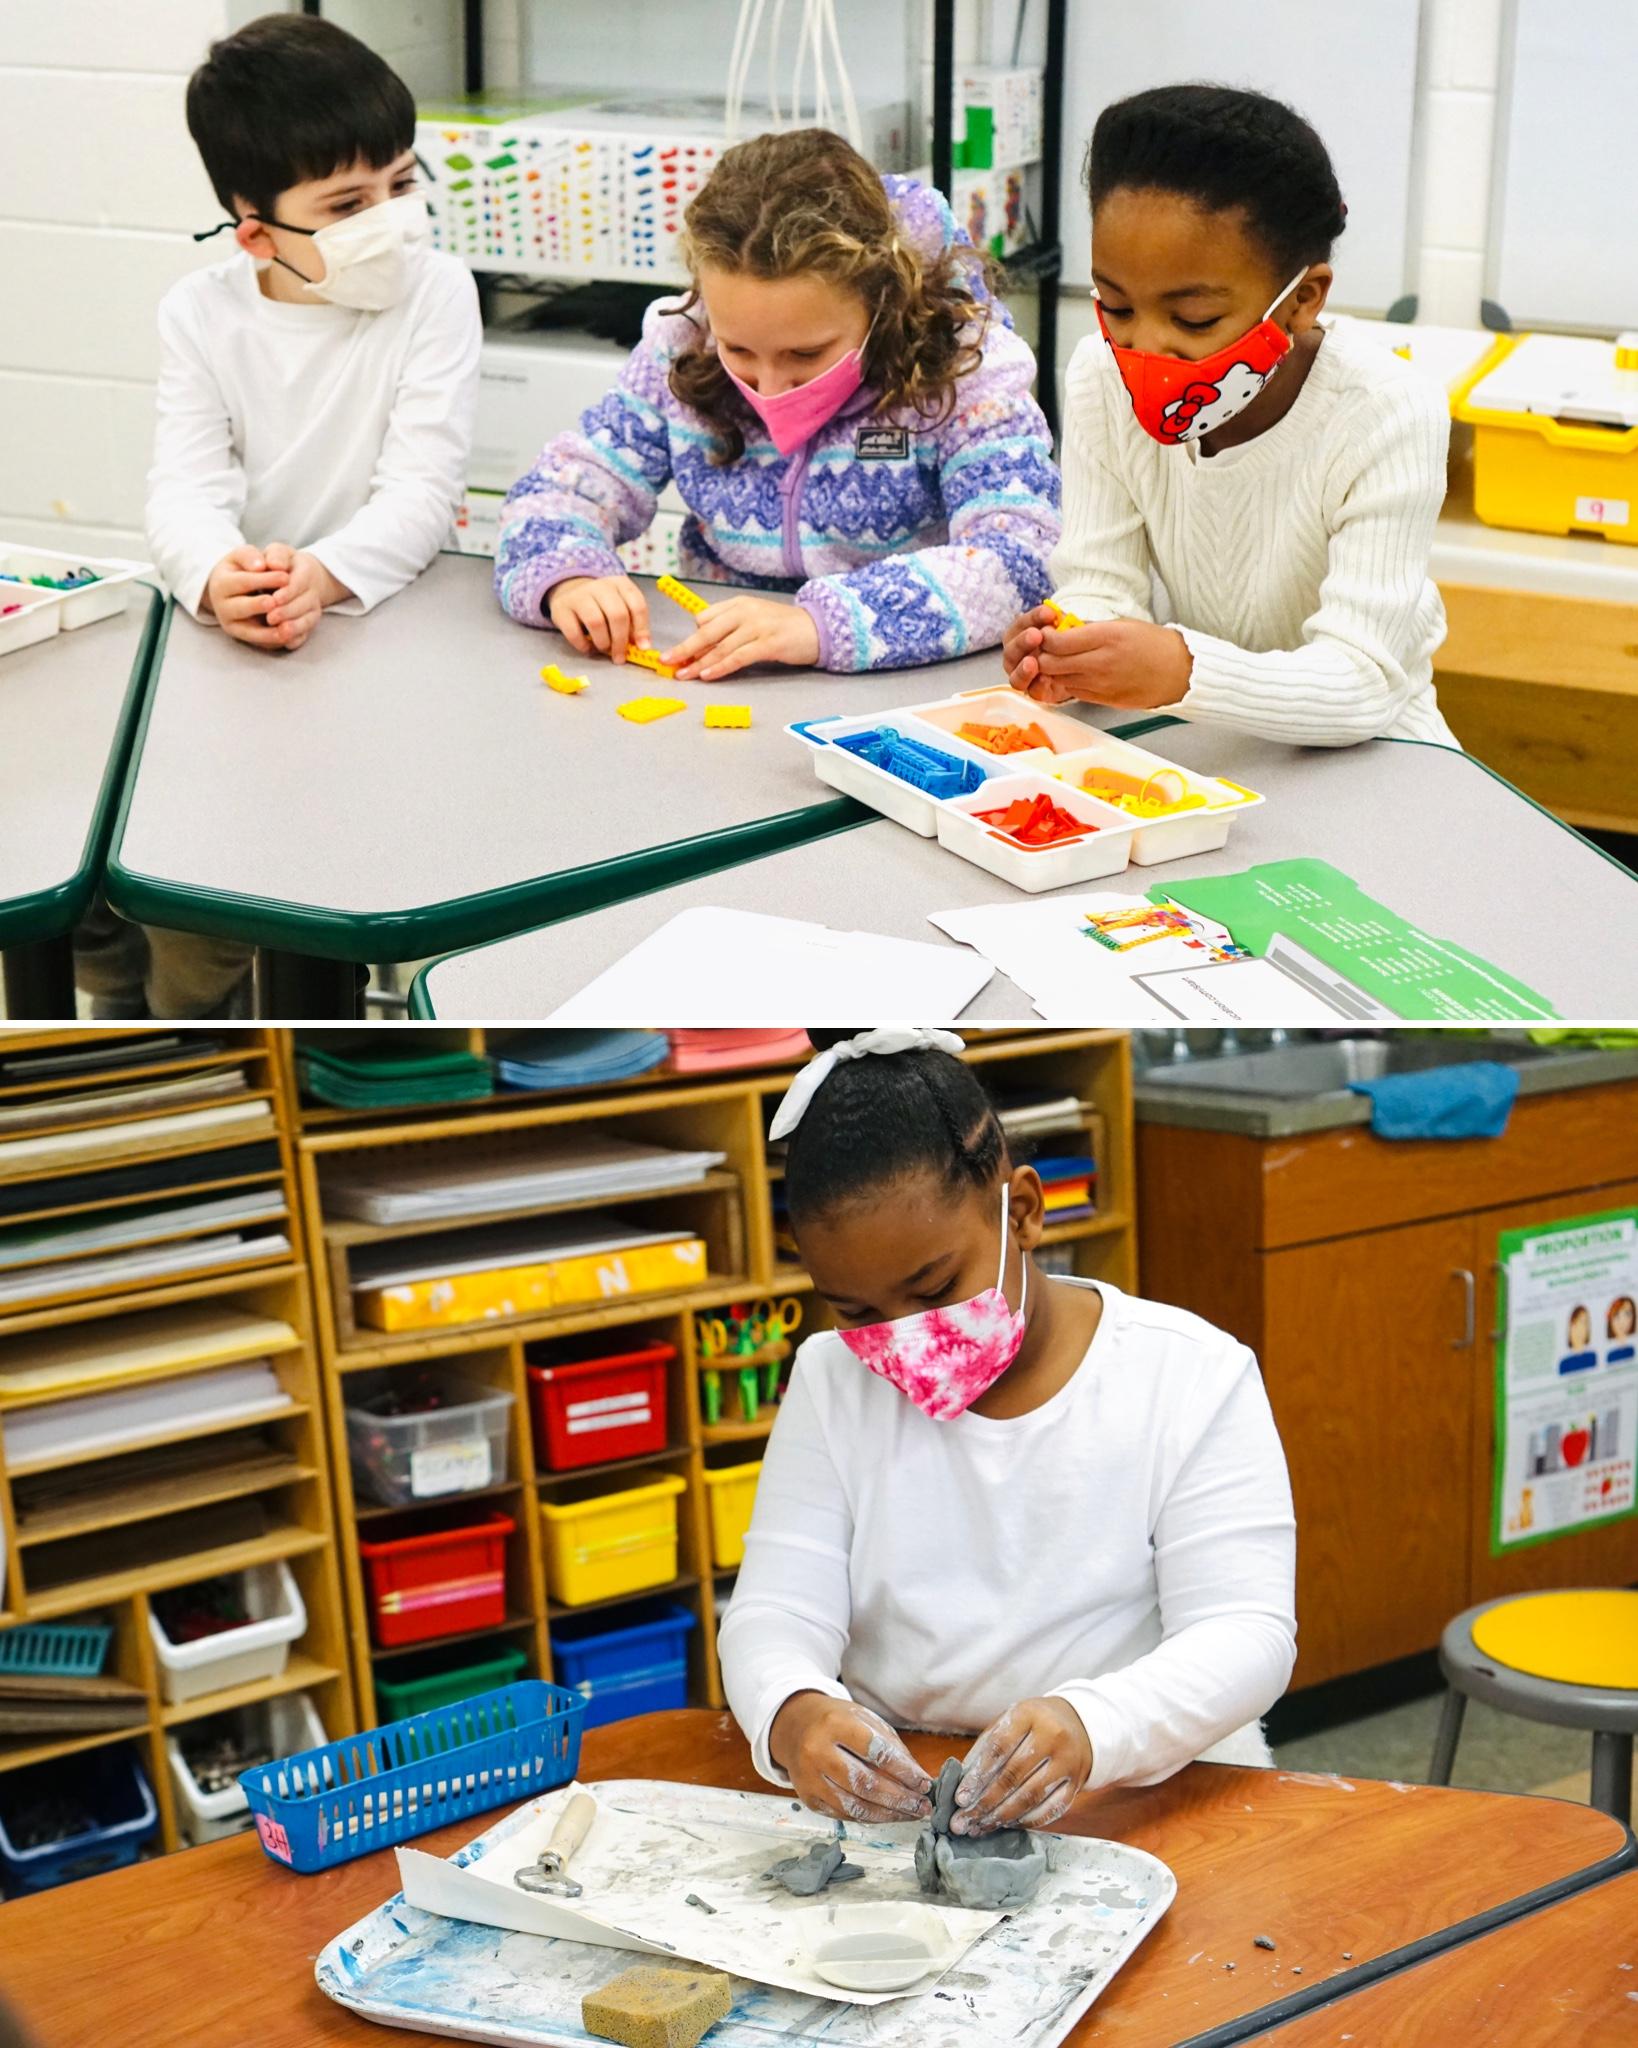 Two pictures on top of each other showing students in art and science class engaged in learning and wearing the color white 